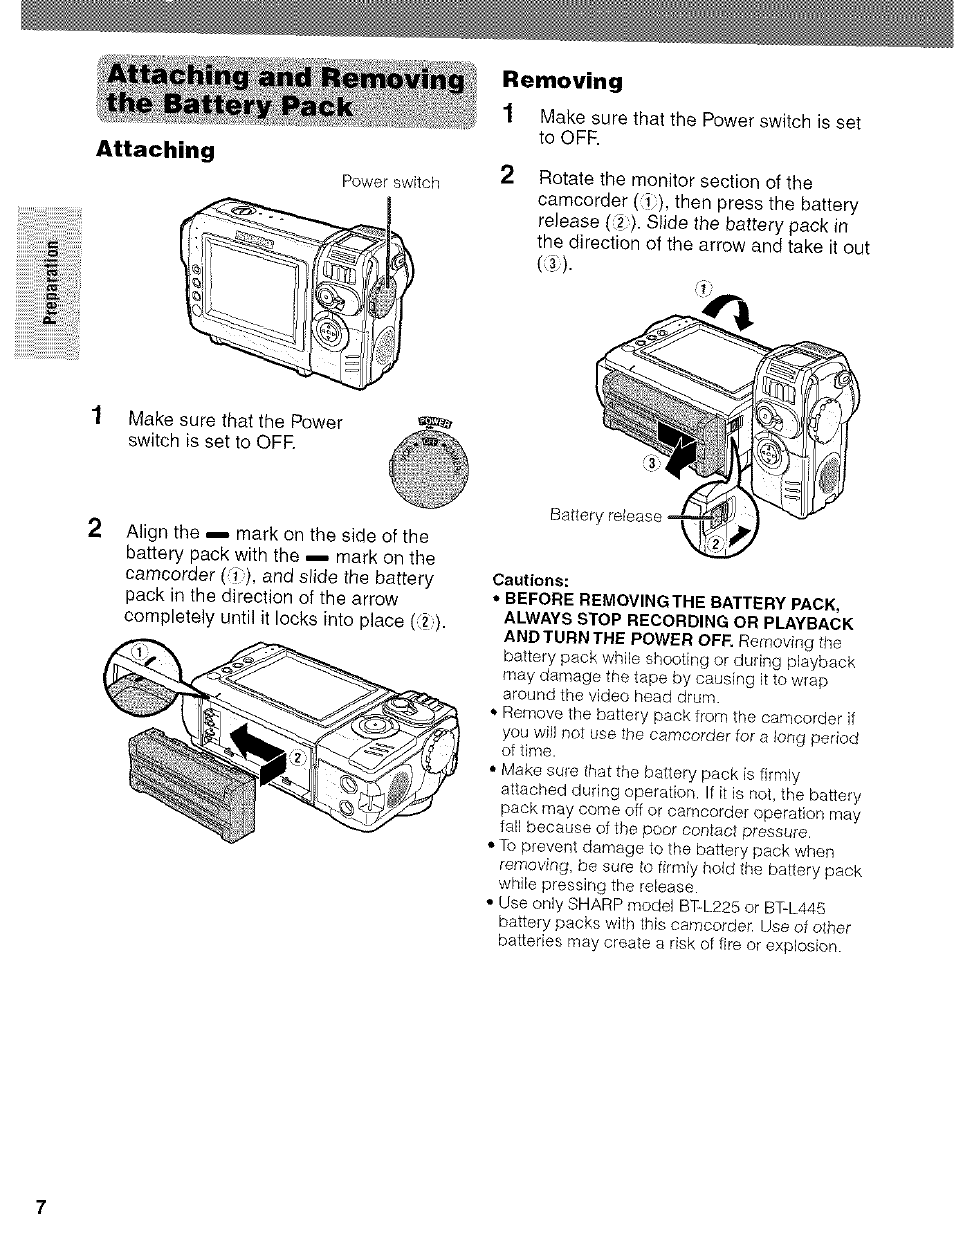 Attaching and removing the battery pack, Attaching, Removing | Preparation | Sharp VIEWCAM VL-NZ50U User Manual | Page 20 / 83